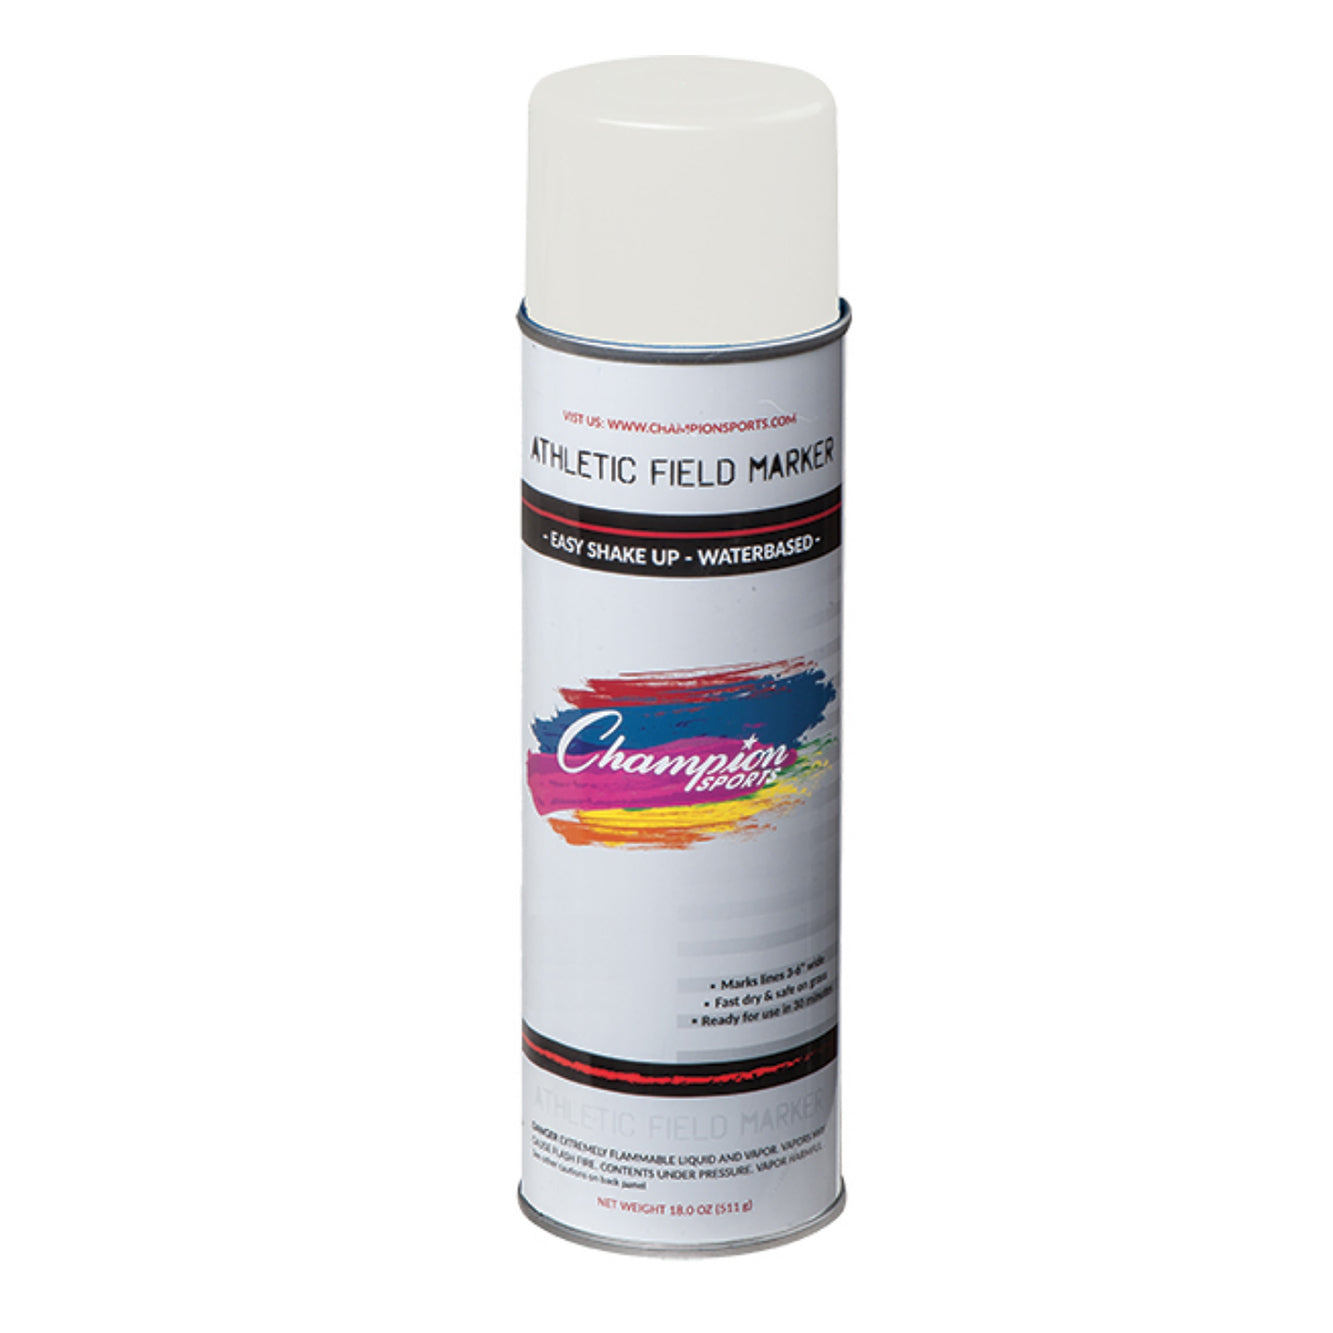 Athletic Field Marking Paint - White